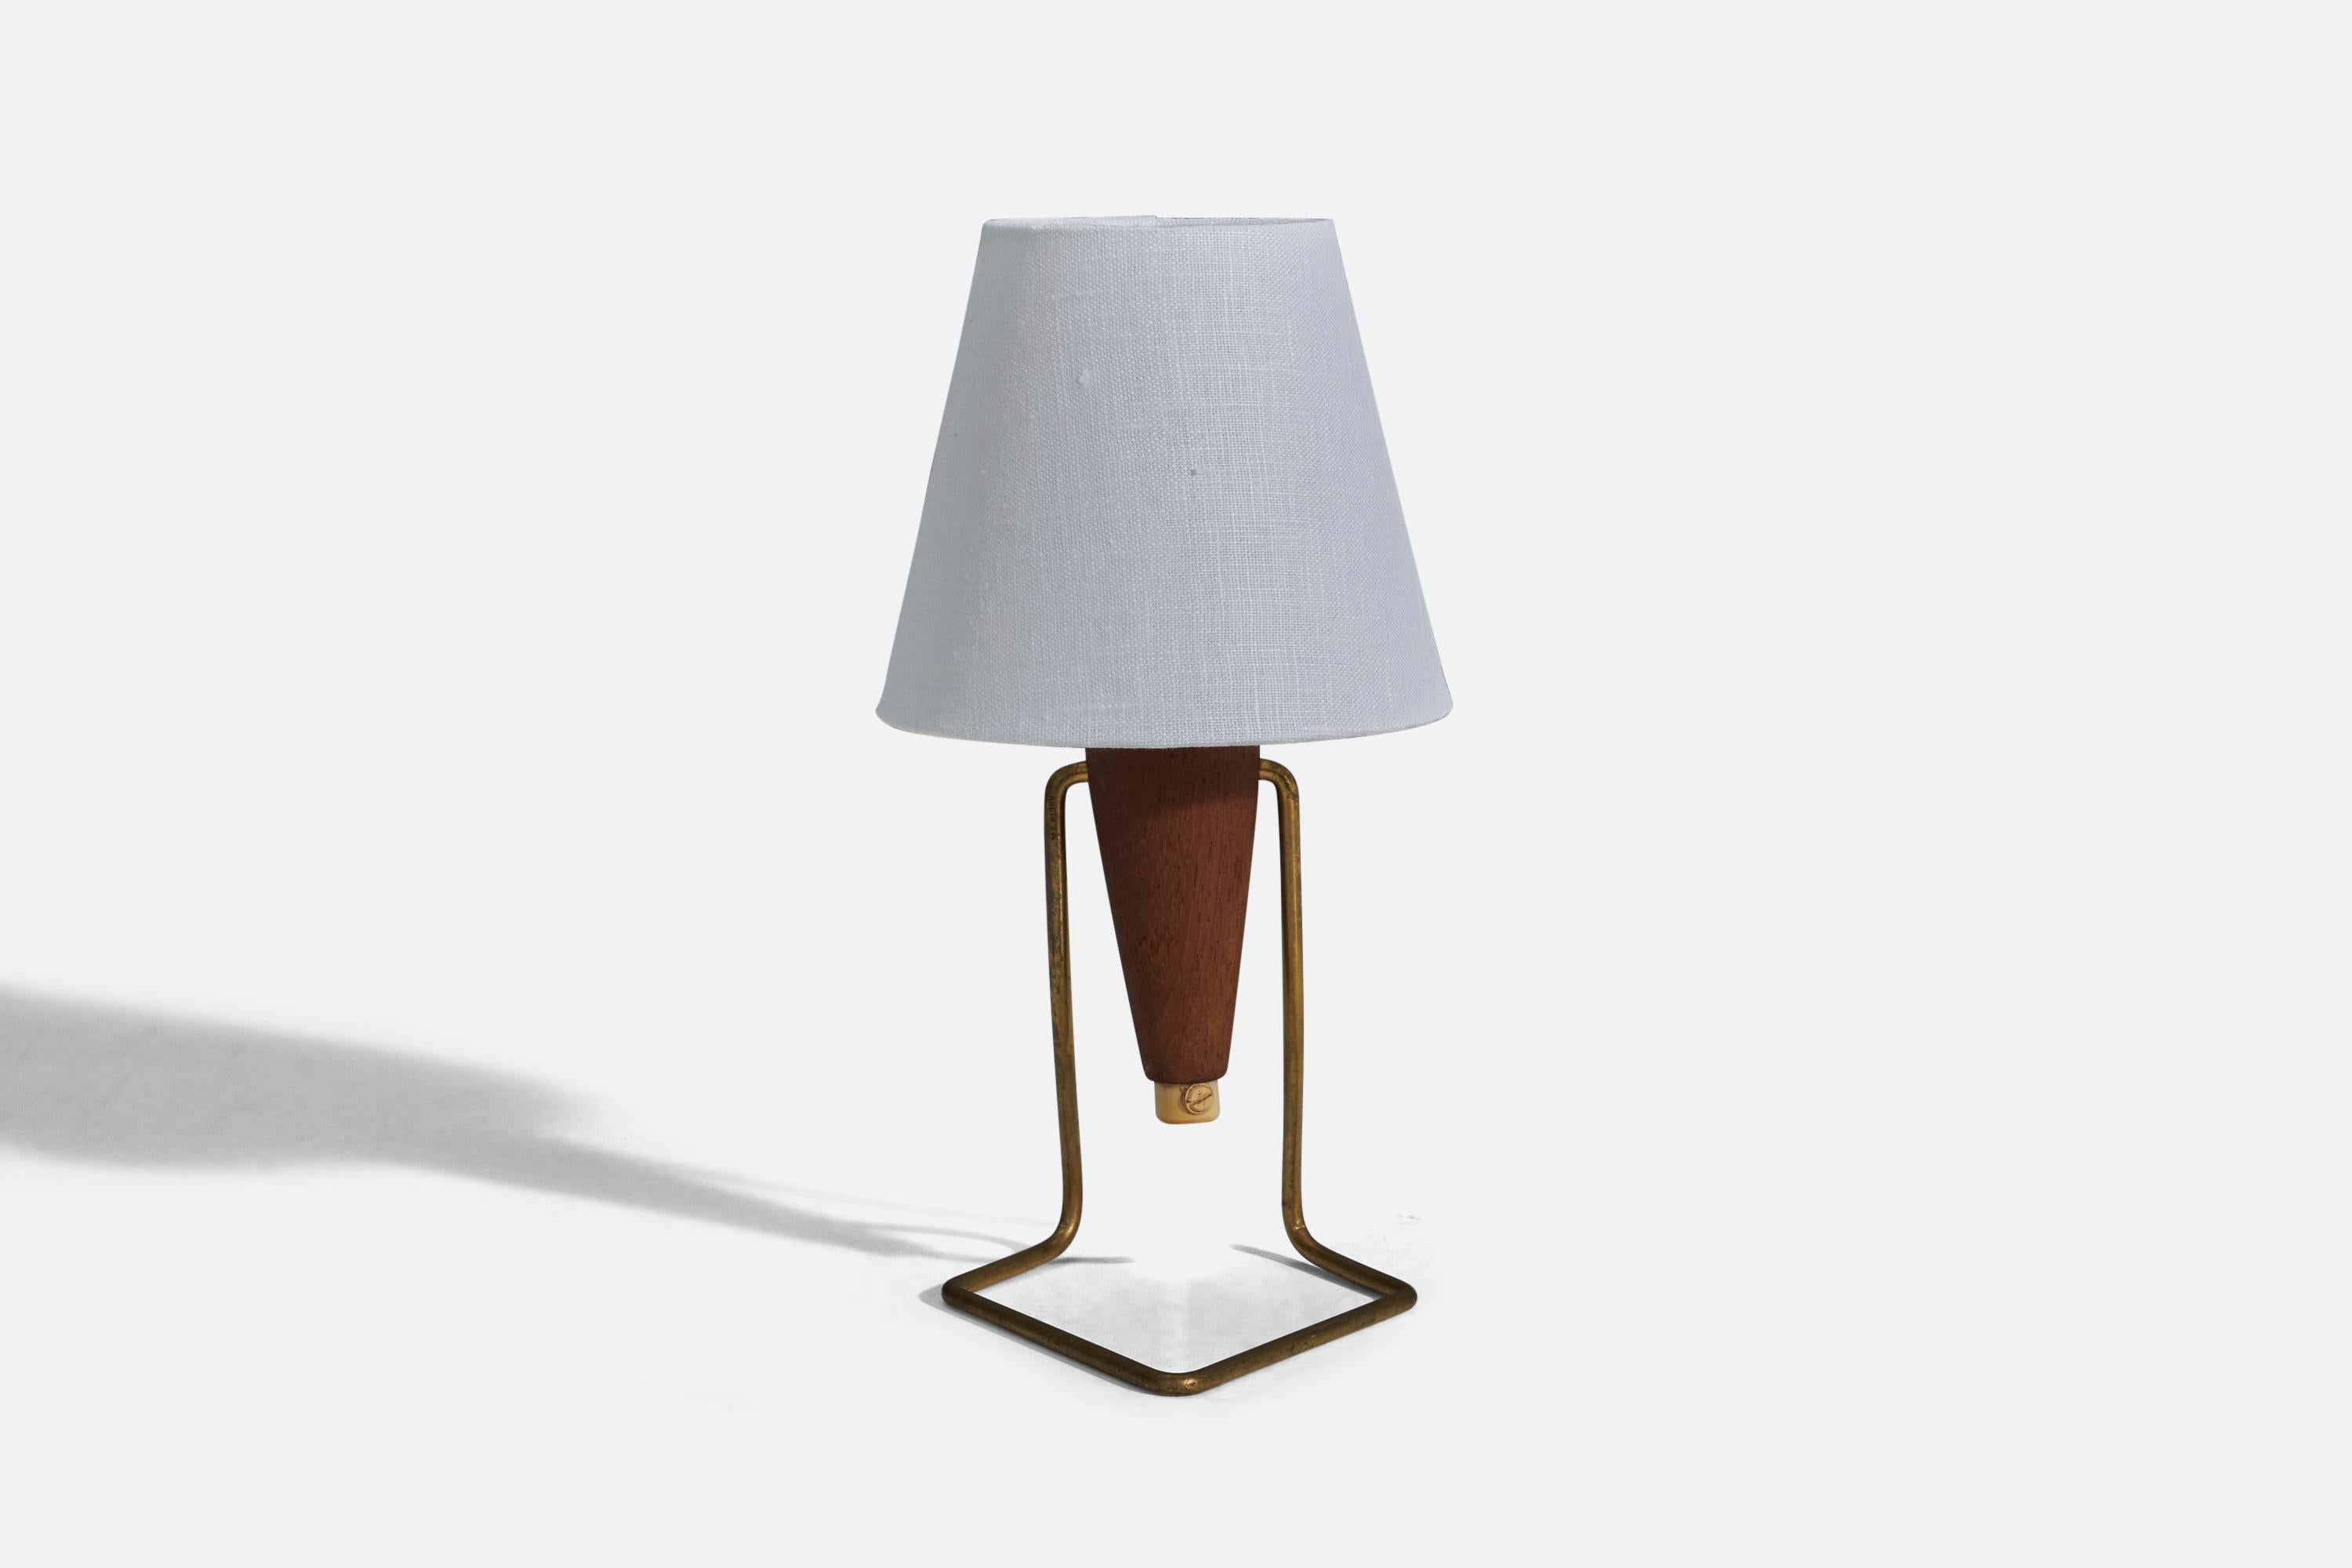 A brass and teak table lamp designed and produced in Denmark, 1950s.

Sold without Lampshade
Dimensions of Lamp (inches) : 7.5 x 4.3 x 5.25 (Height x Width x Depth)
Dimensions of Lampshade (inches) : 3 x 5 x 4.5 (Top Diameter x Bottom Diameter x